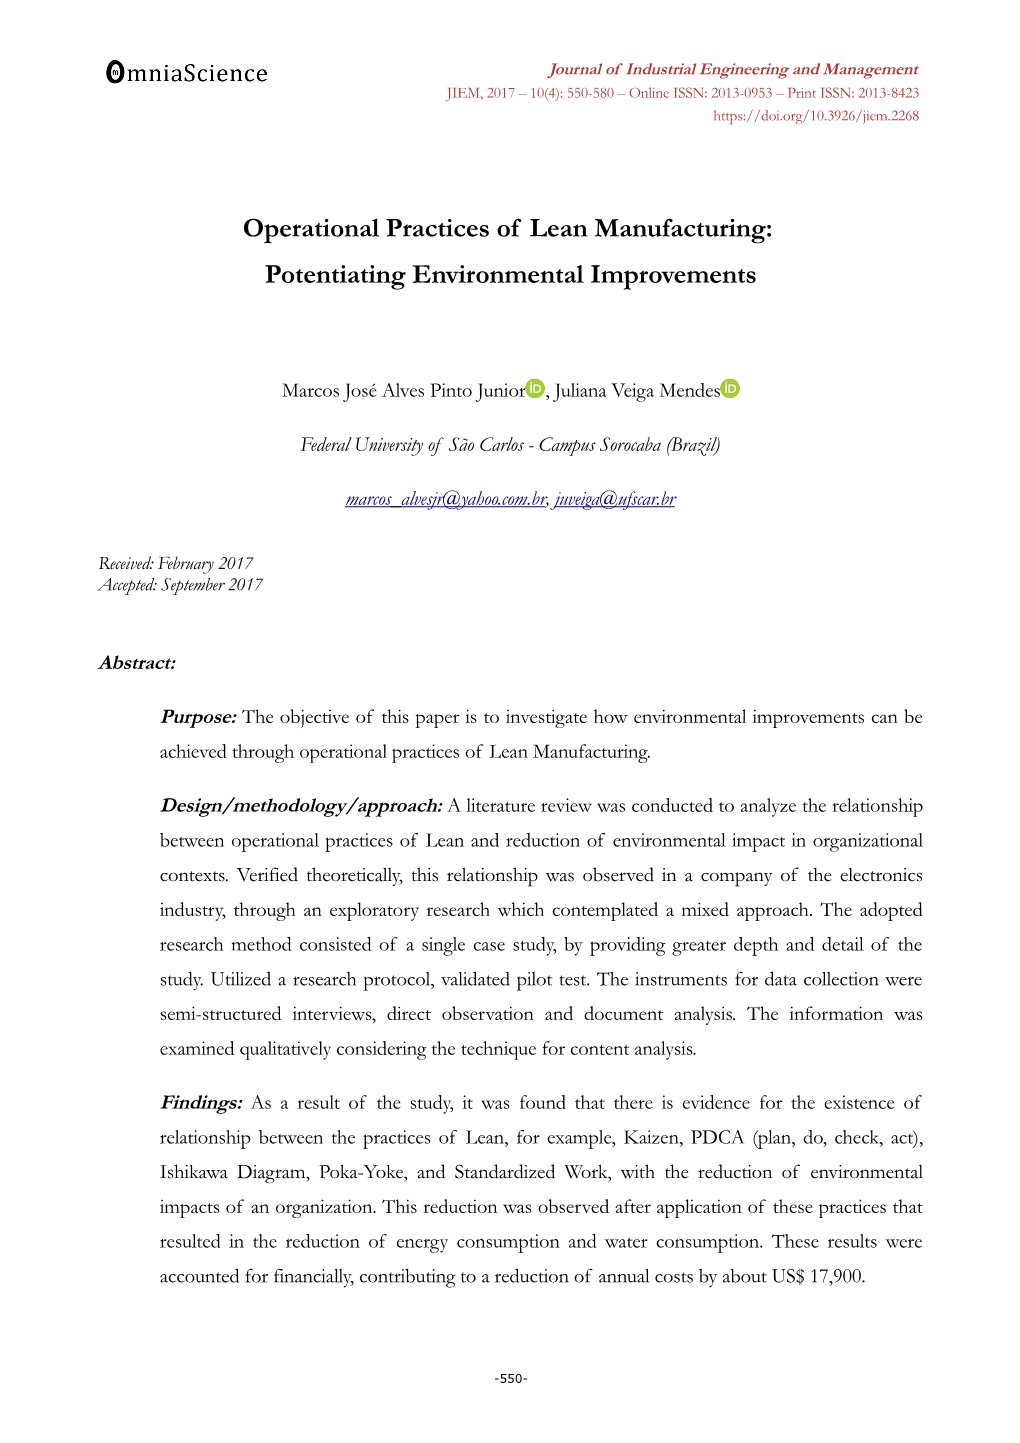 Operational Practices of Lean Manufacturing: Potentiating Environmental Improvements